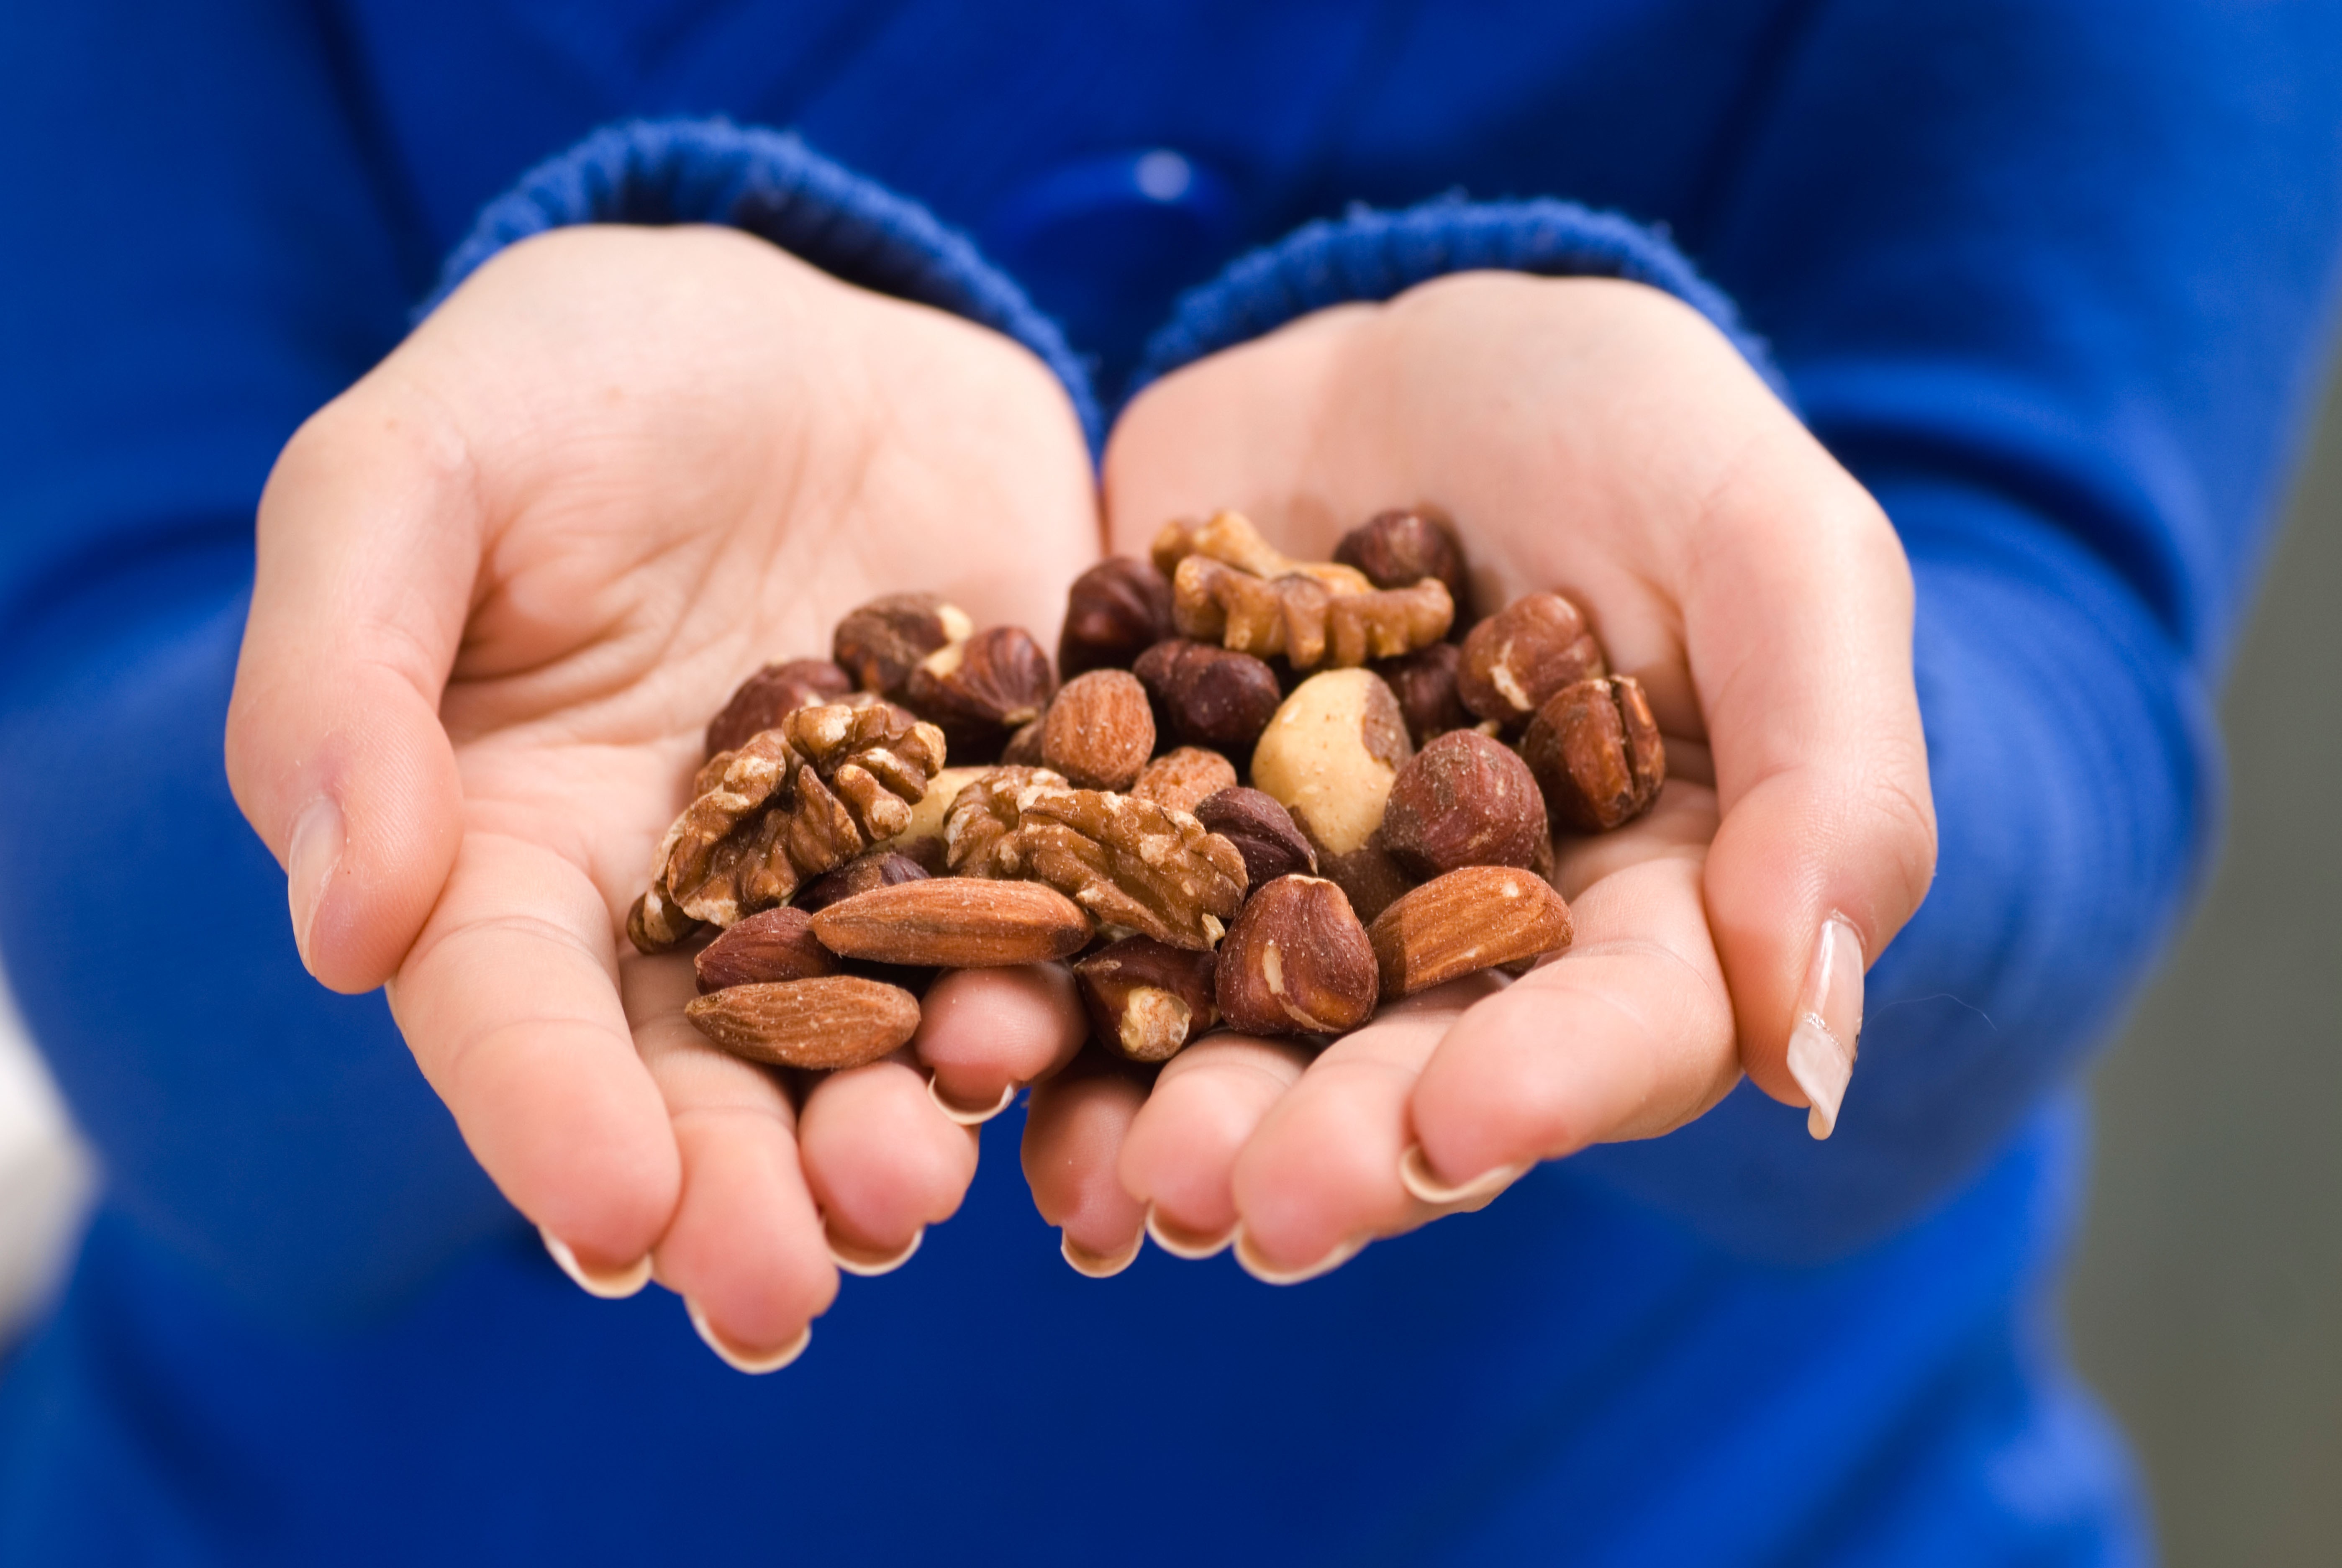 Nuts are a great source of iron, which is the most common nutrient deficiency in the world.